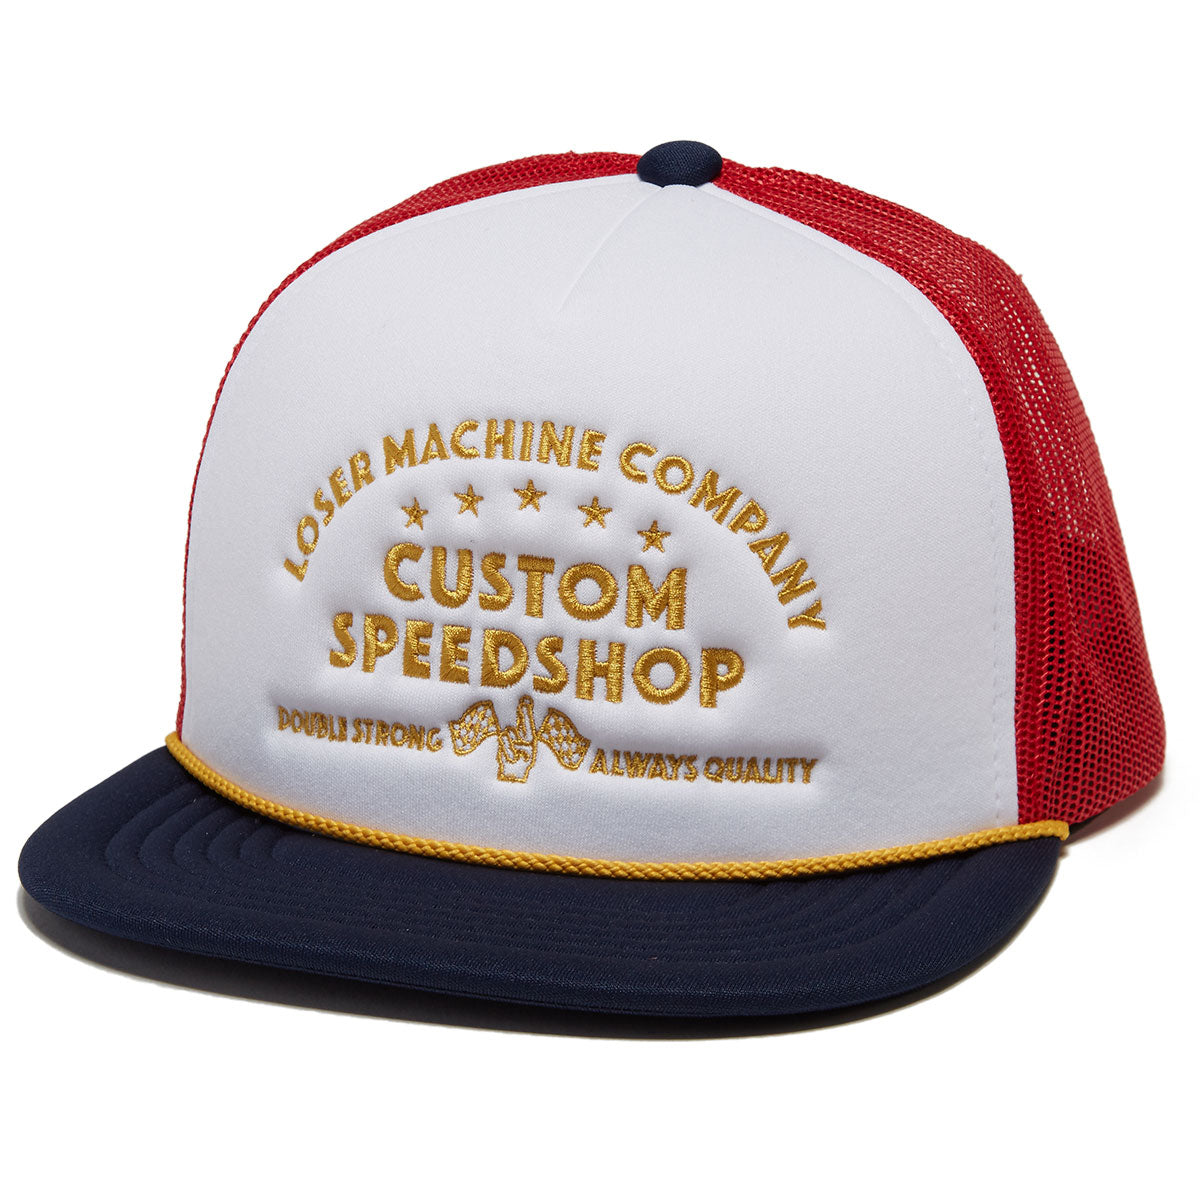 Loser Machine Double Down Hat - White/Red/Navy image 1